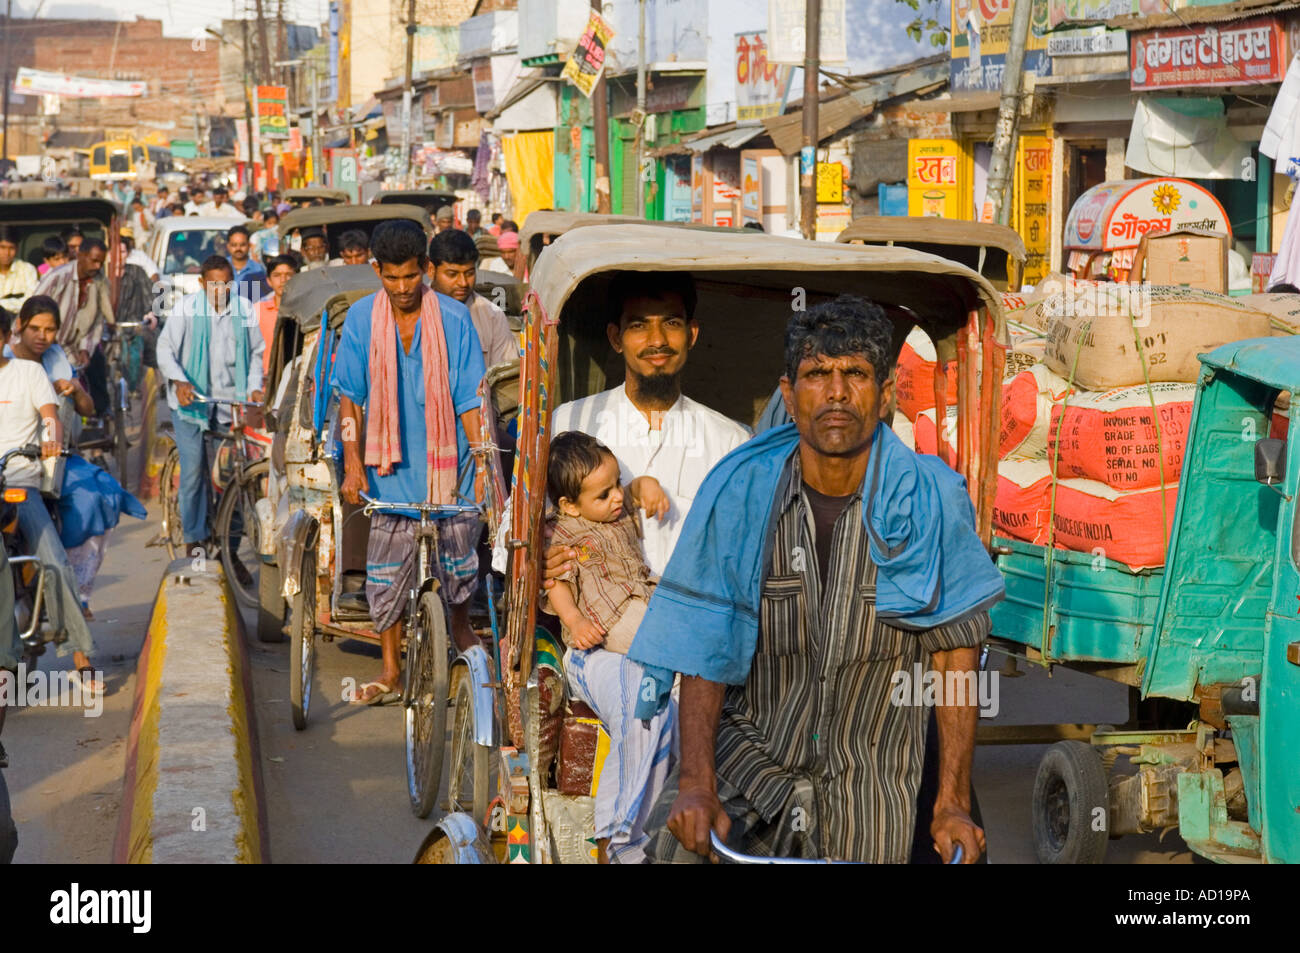 A compressed perspective view of a busy street in Varanasi with people on  cycle rickshaws and bicycles. Stock Photo